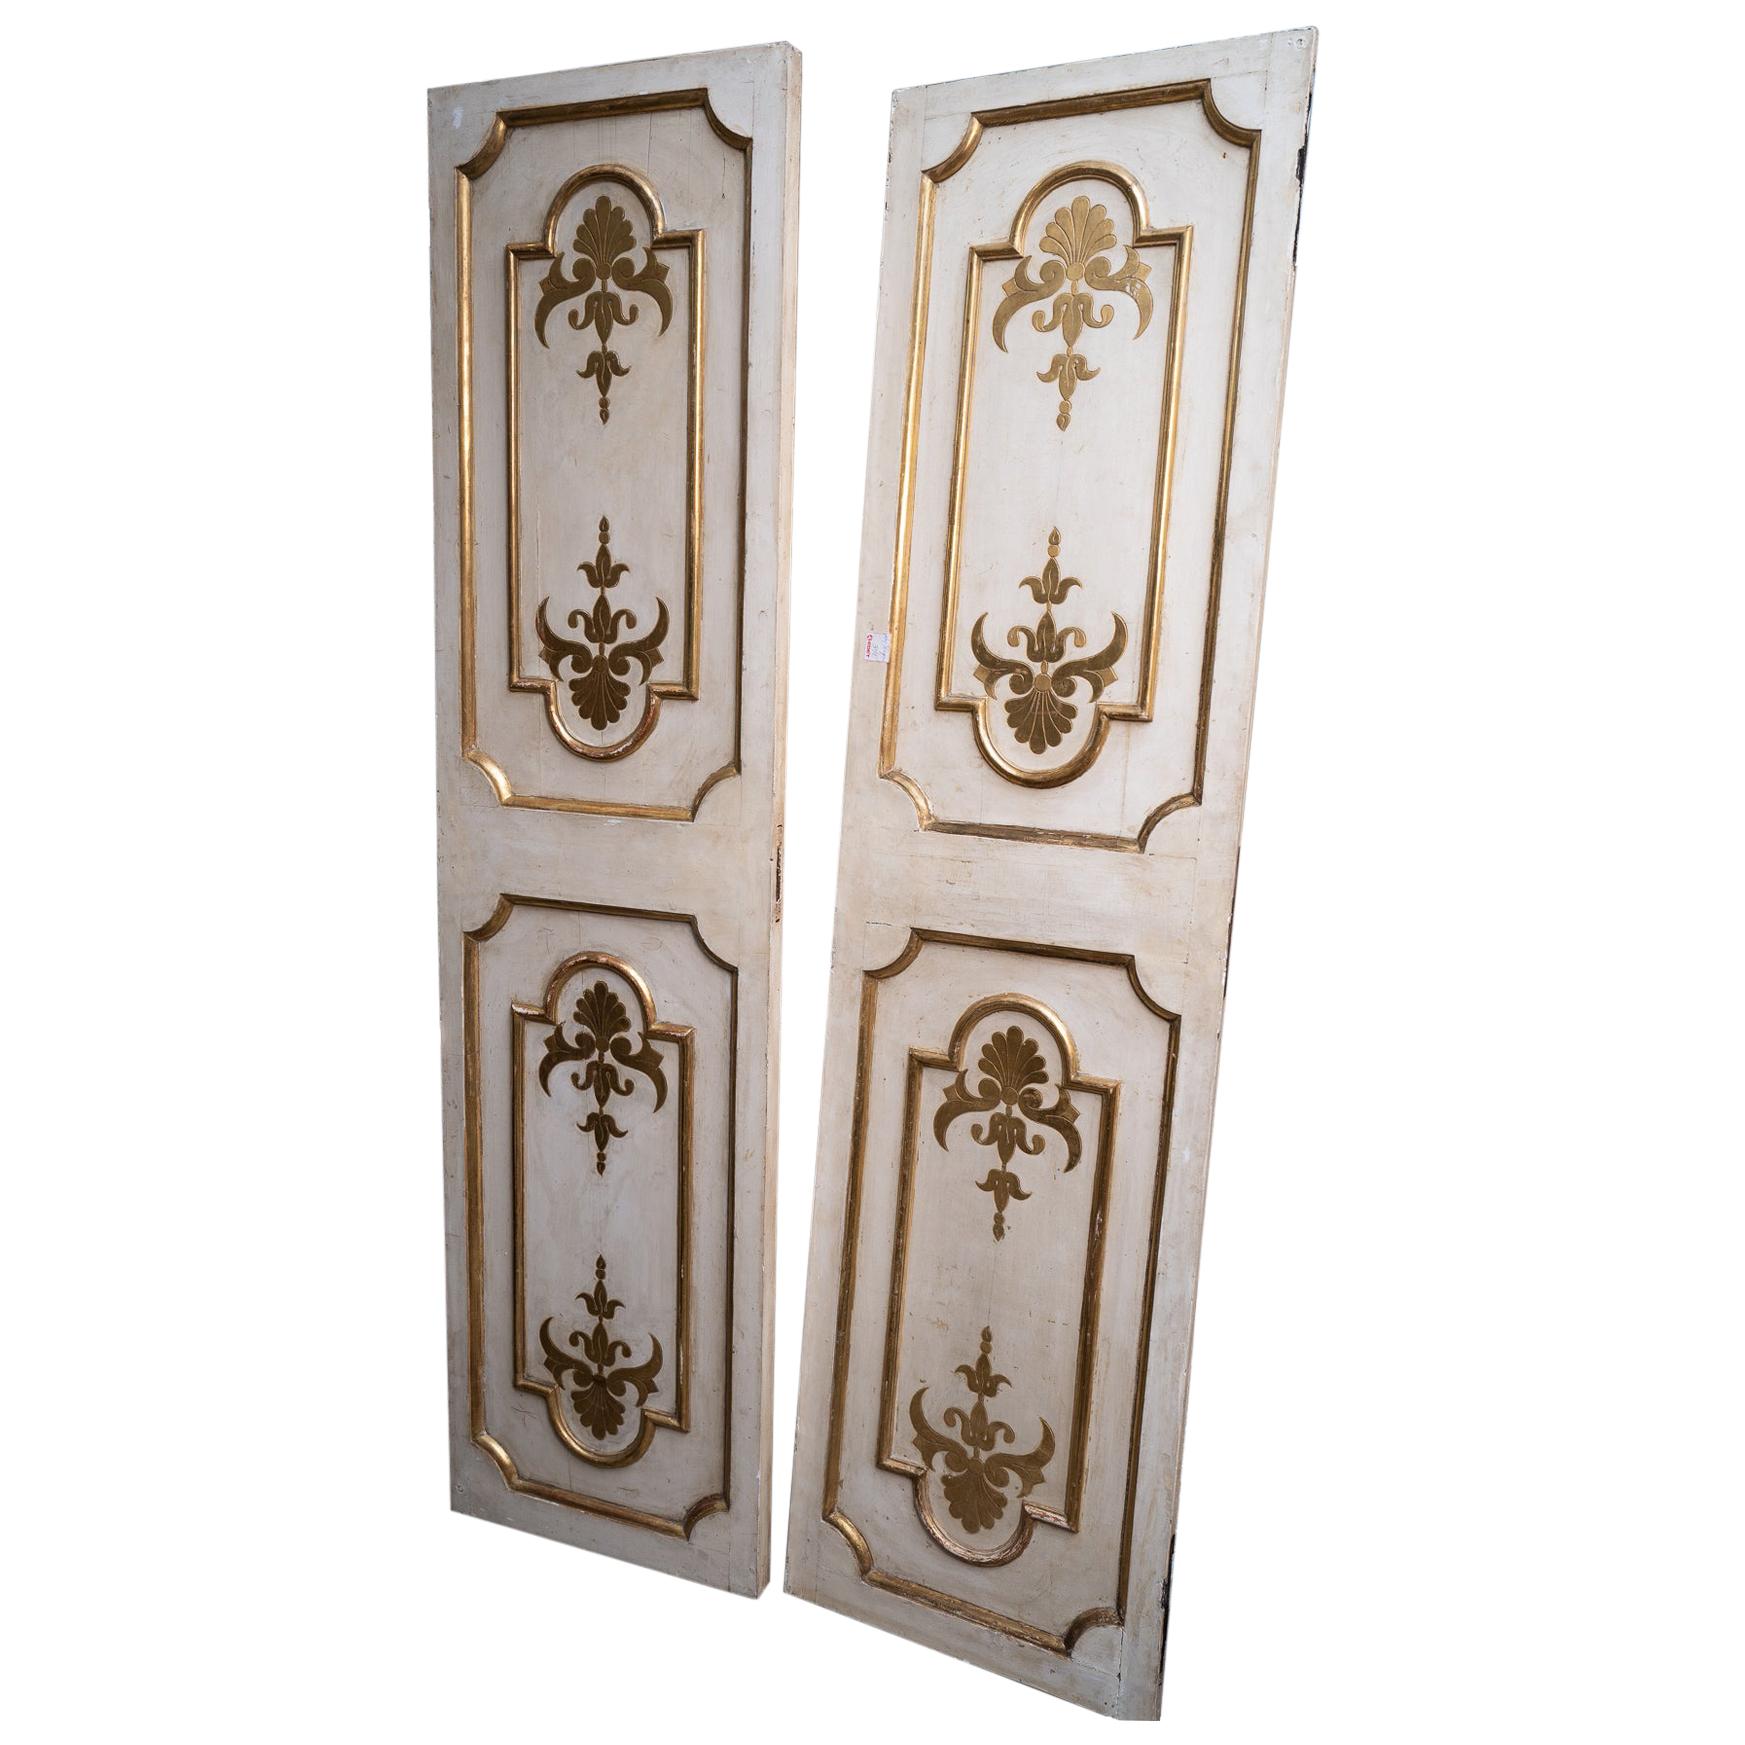 Exceptional Set of Three-Gilded and Painted Pairs of Interior Doors